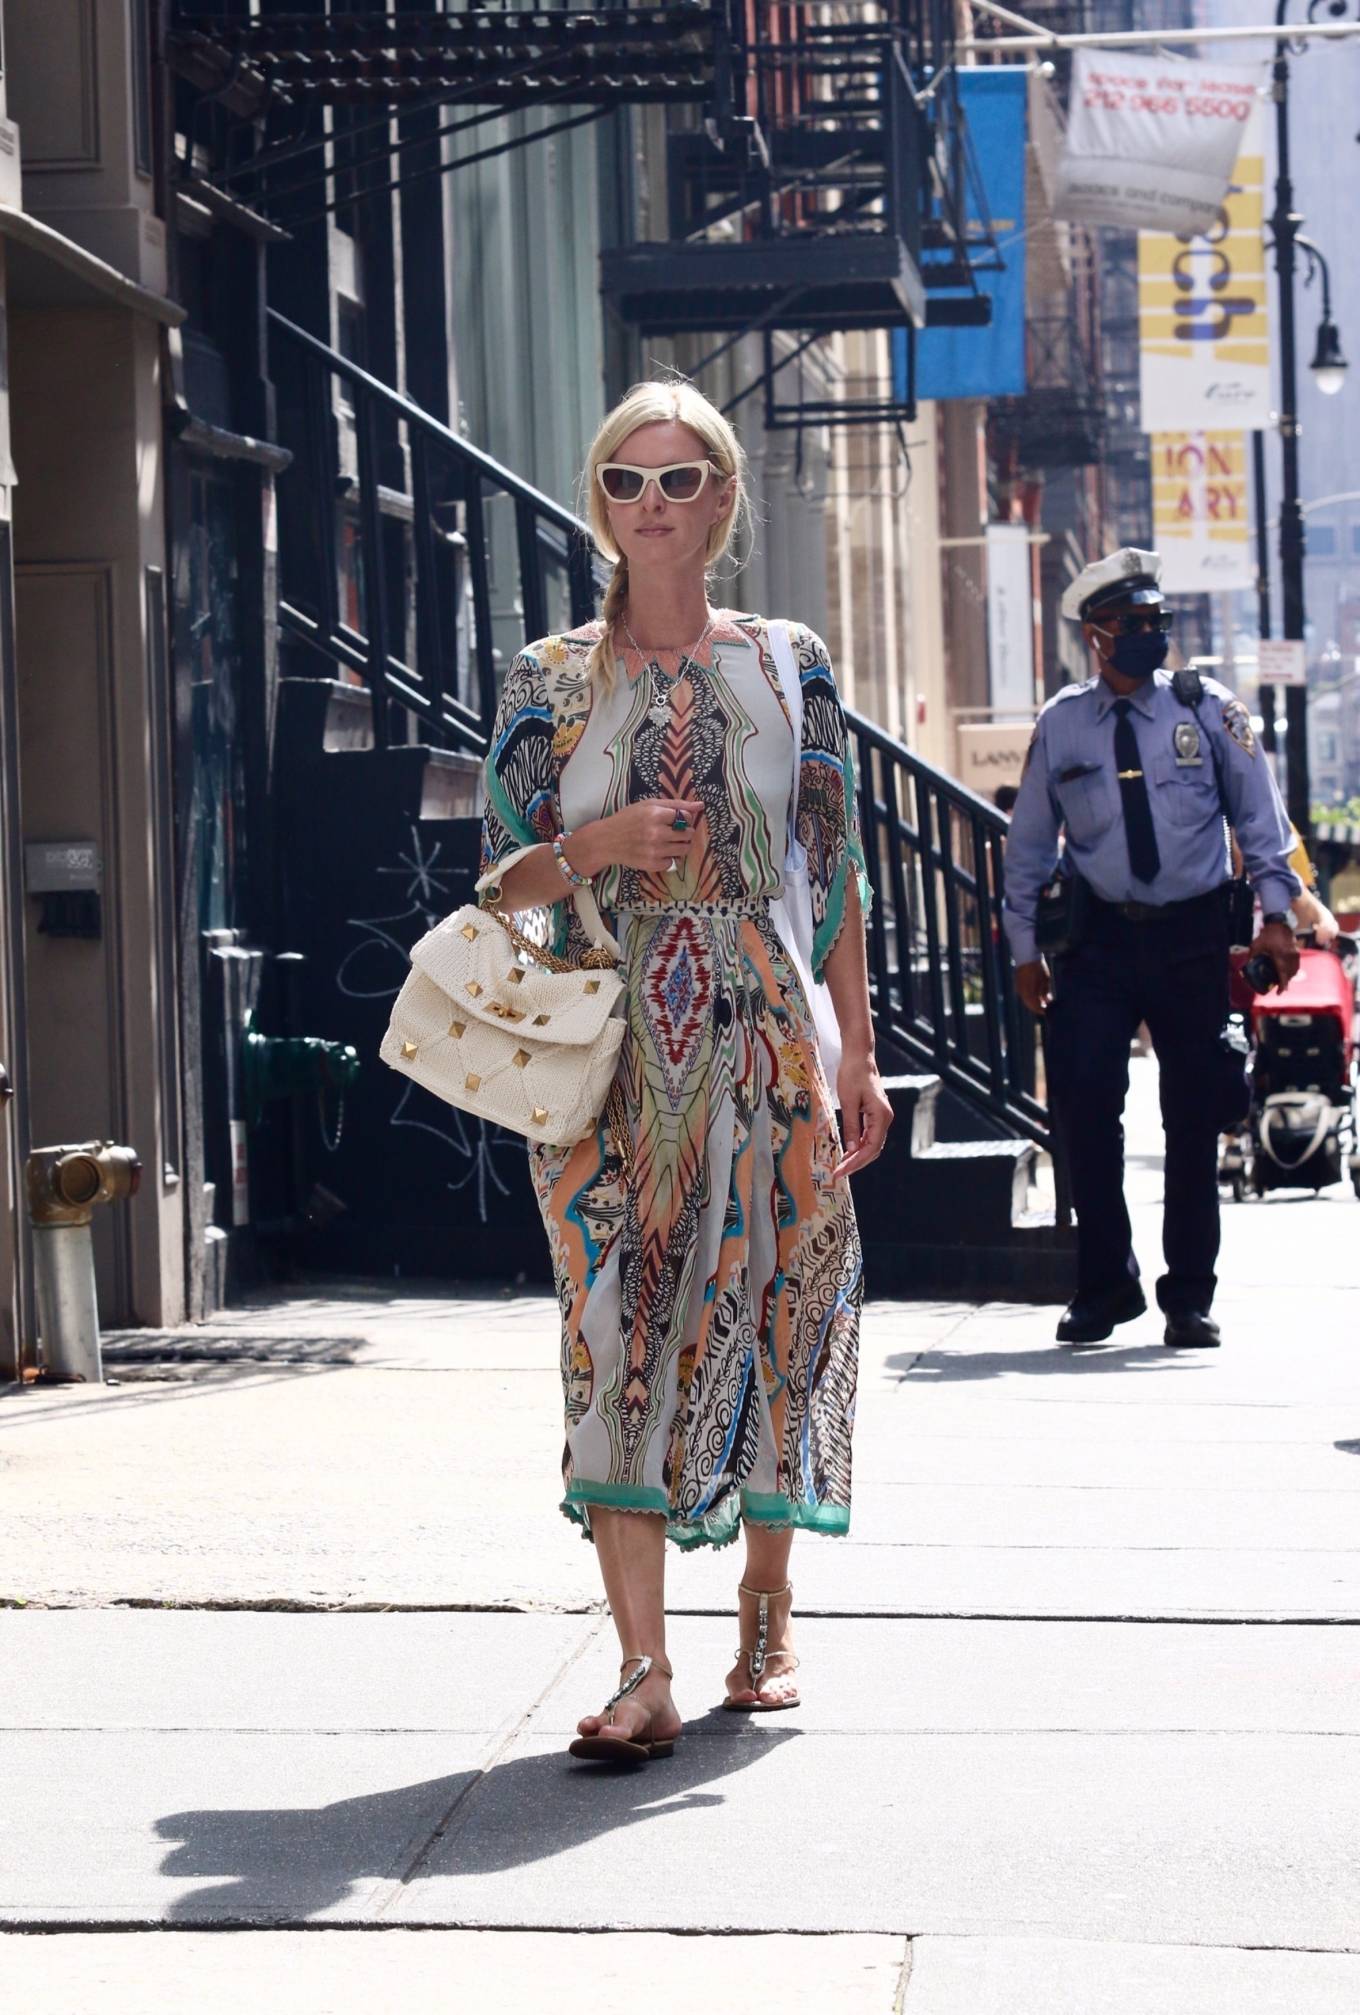 Nicky Hilton 2021 : Nicky Hilton – In a colorful summery dress out on Labor Day Weekend in Manhattan’s Soho area-12